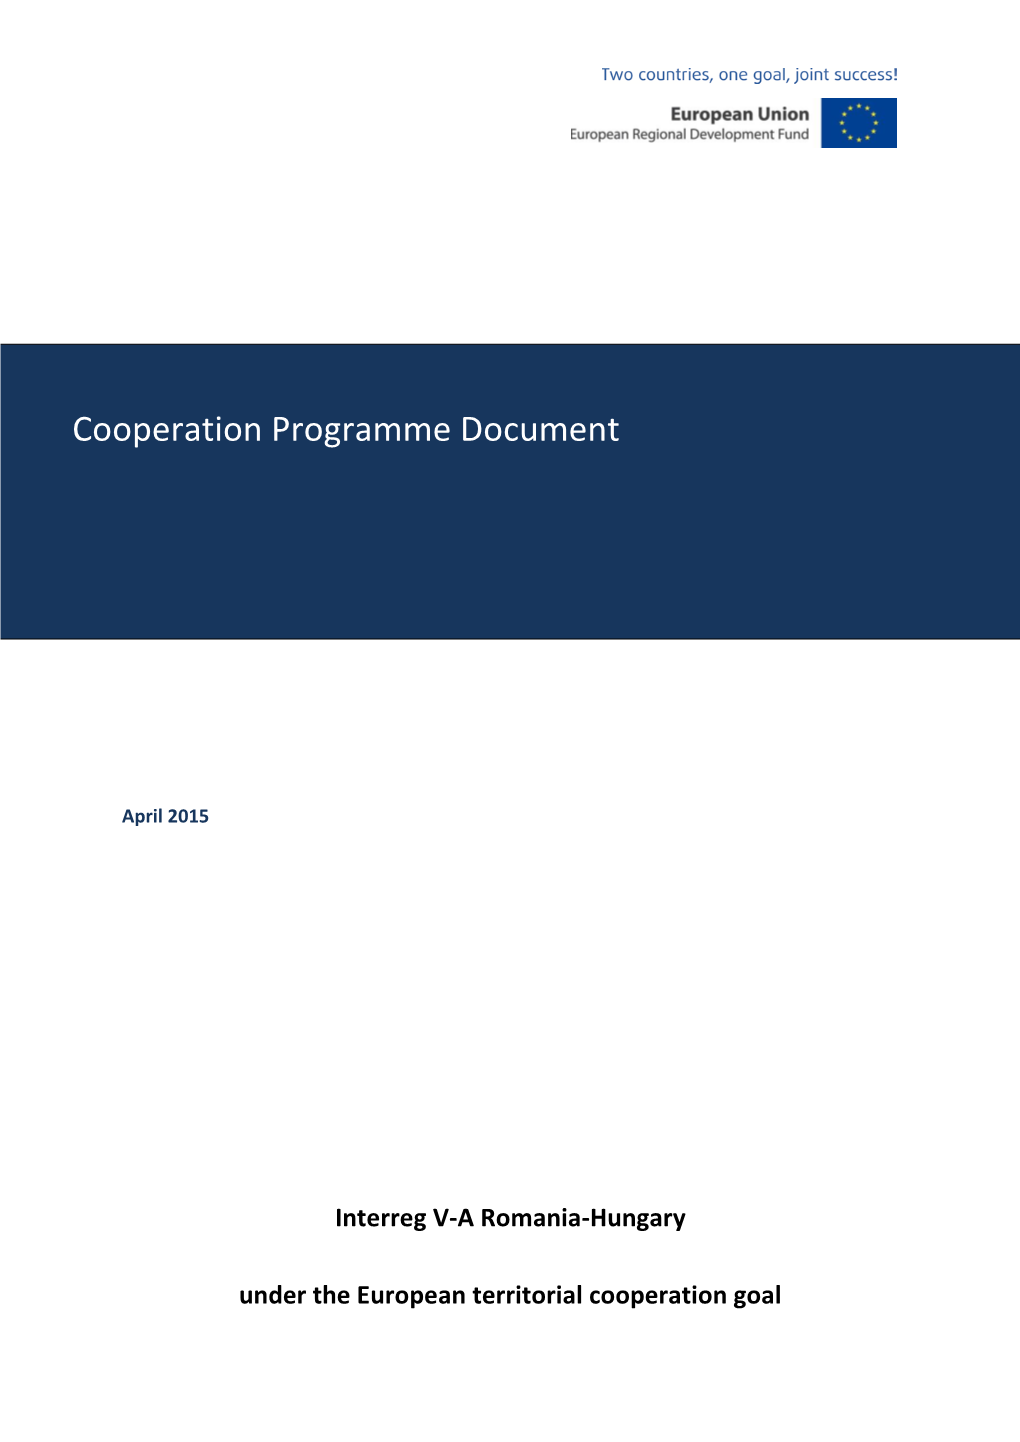 Cooperation Programme Document